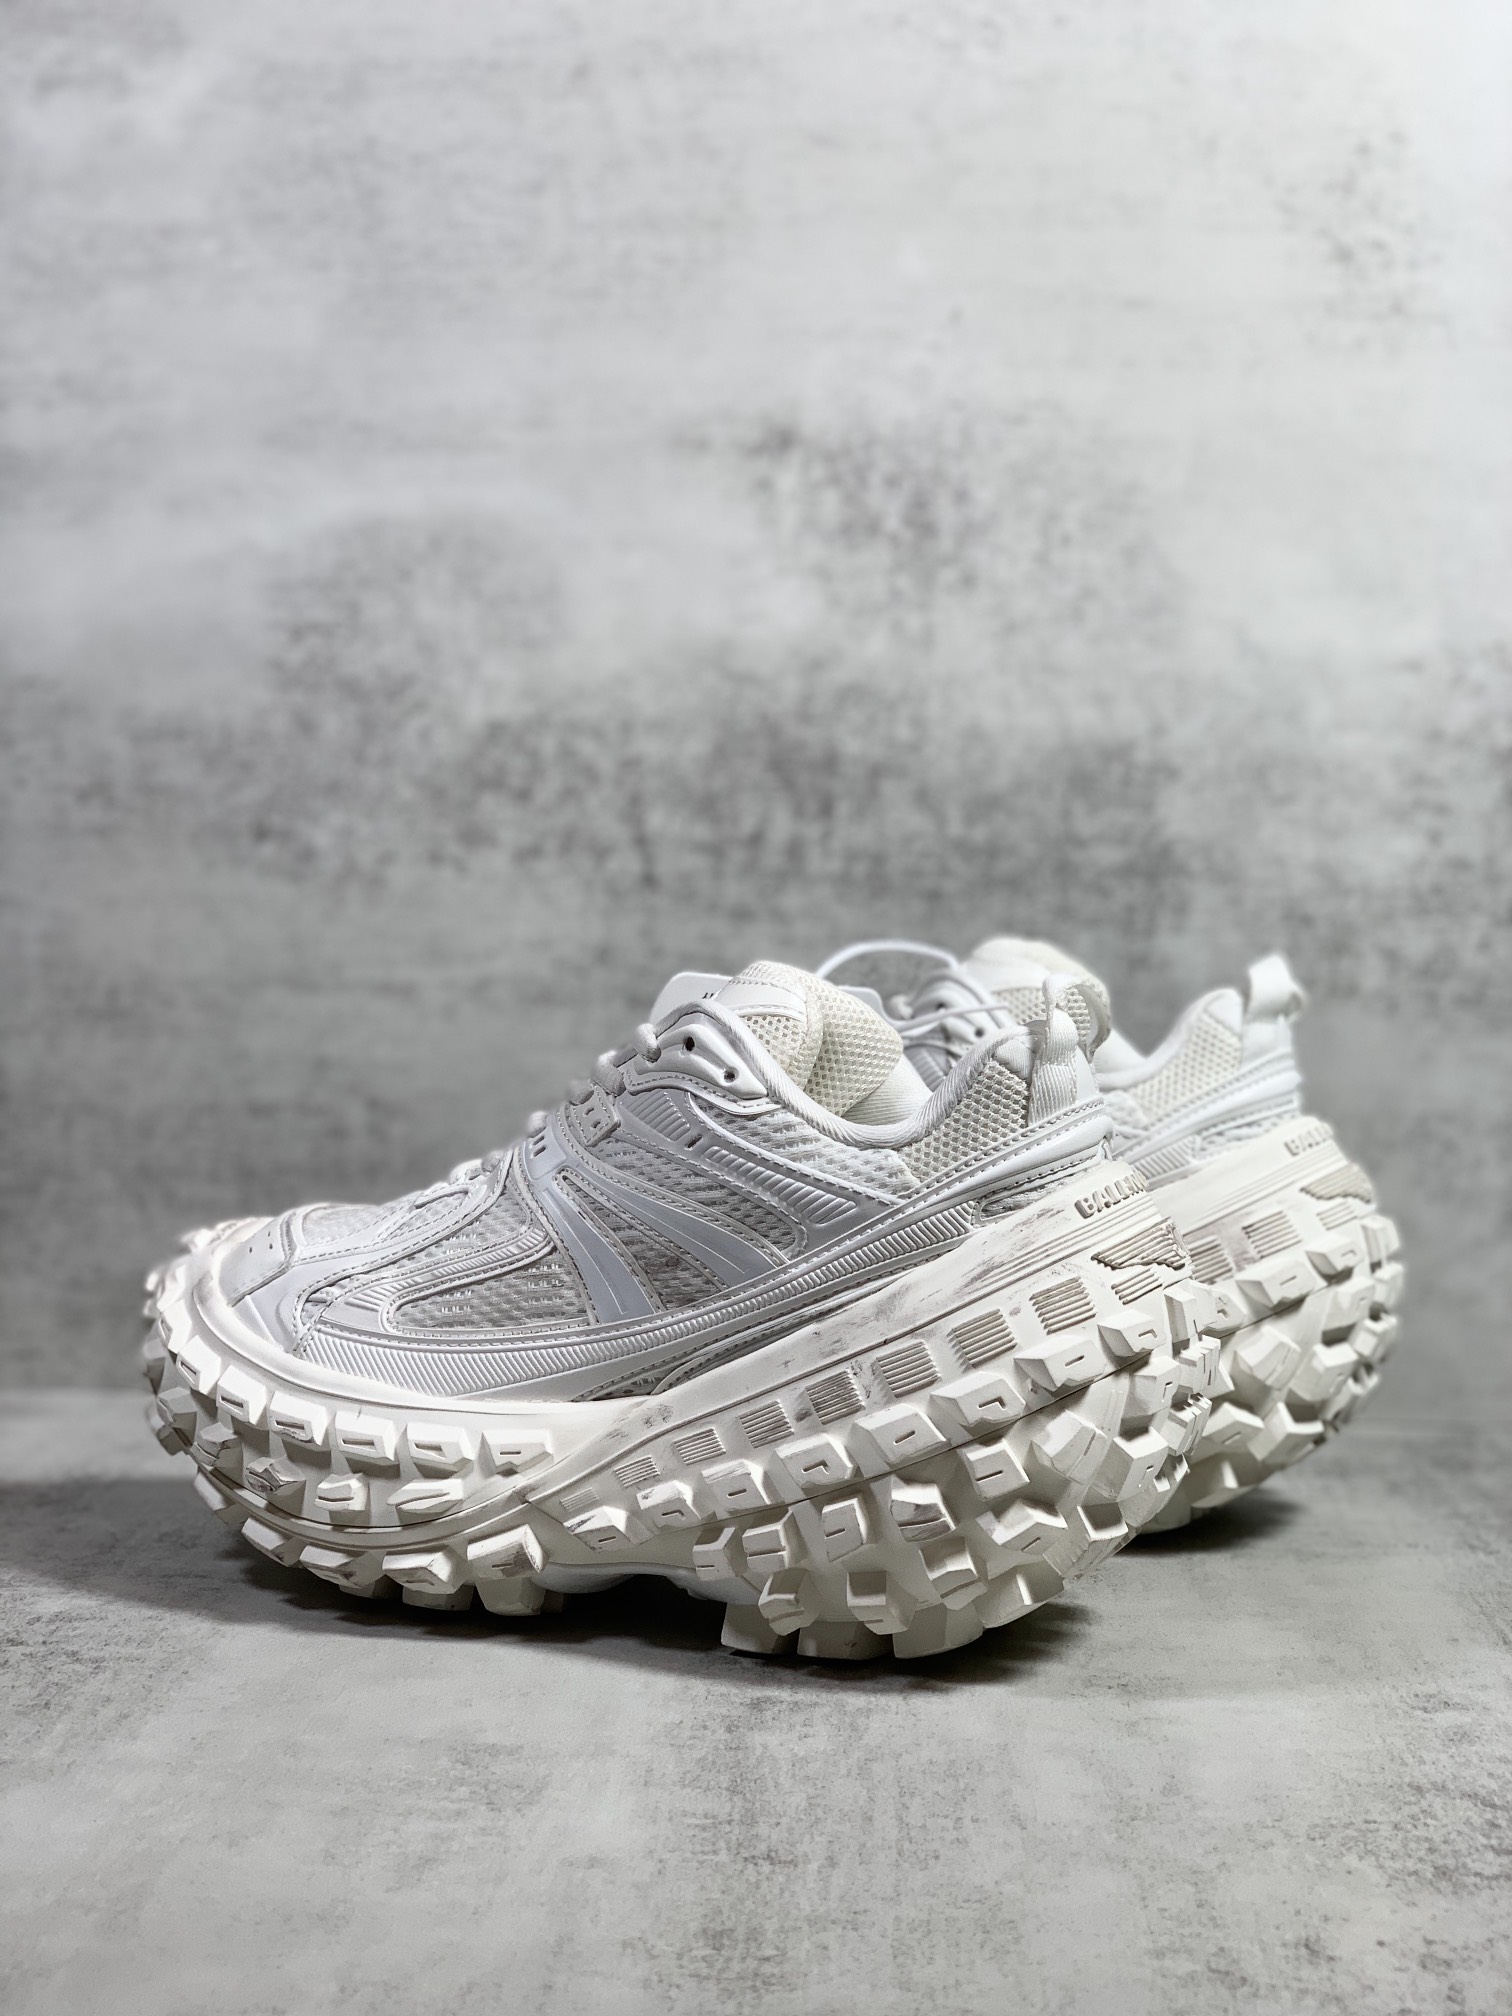 Balenciaga Defender mesh and rubber platform sneakers in white